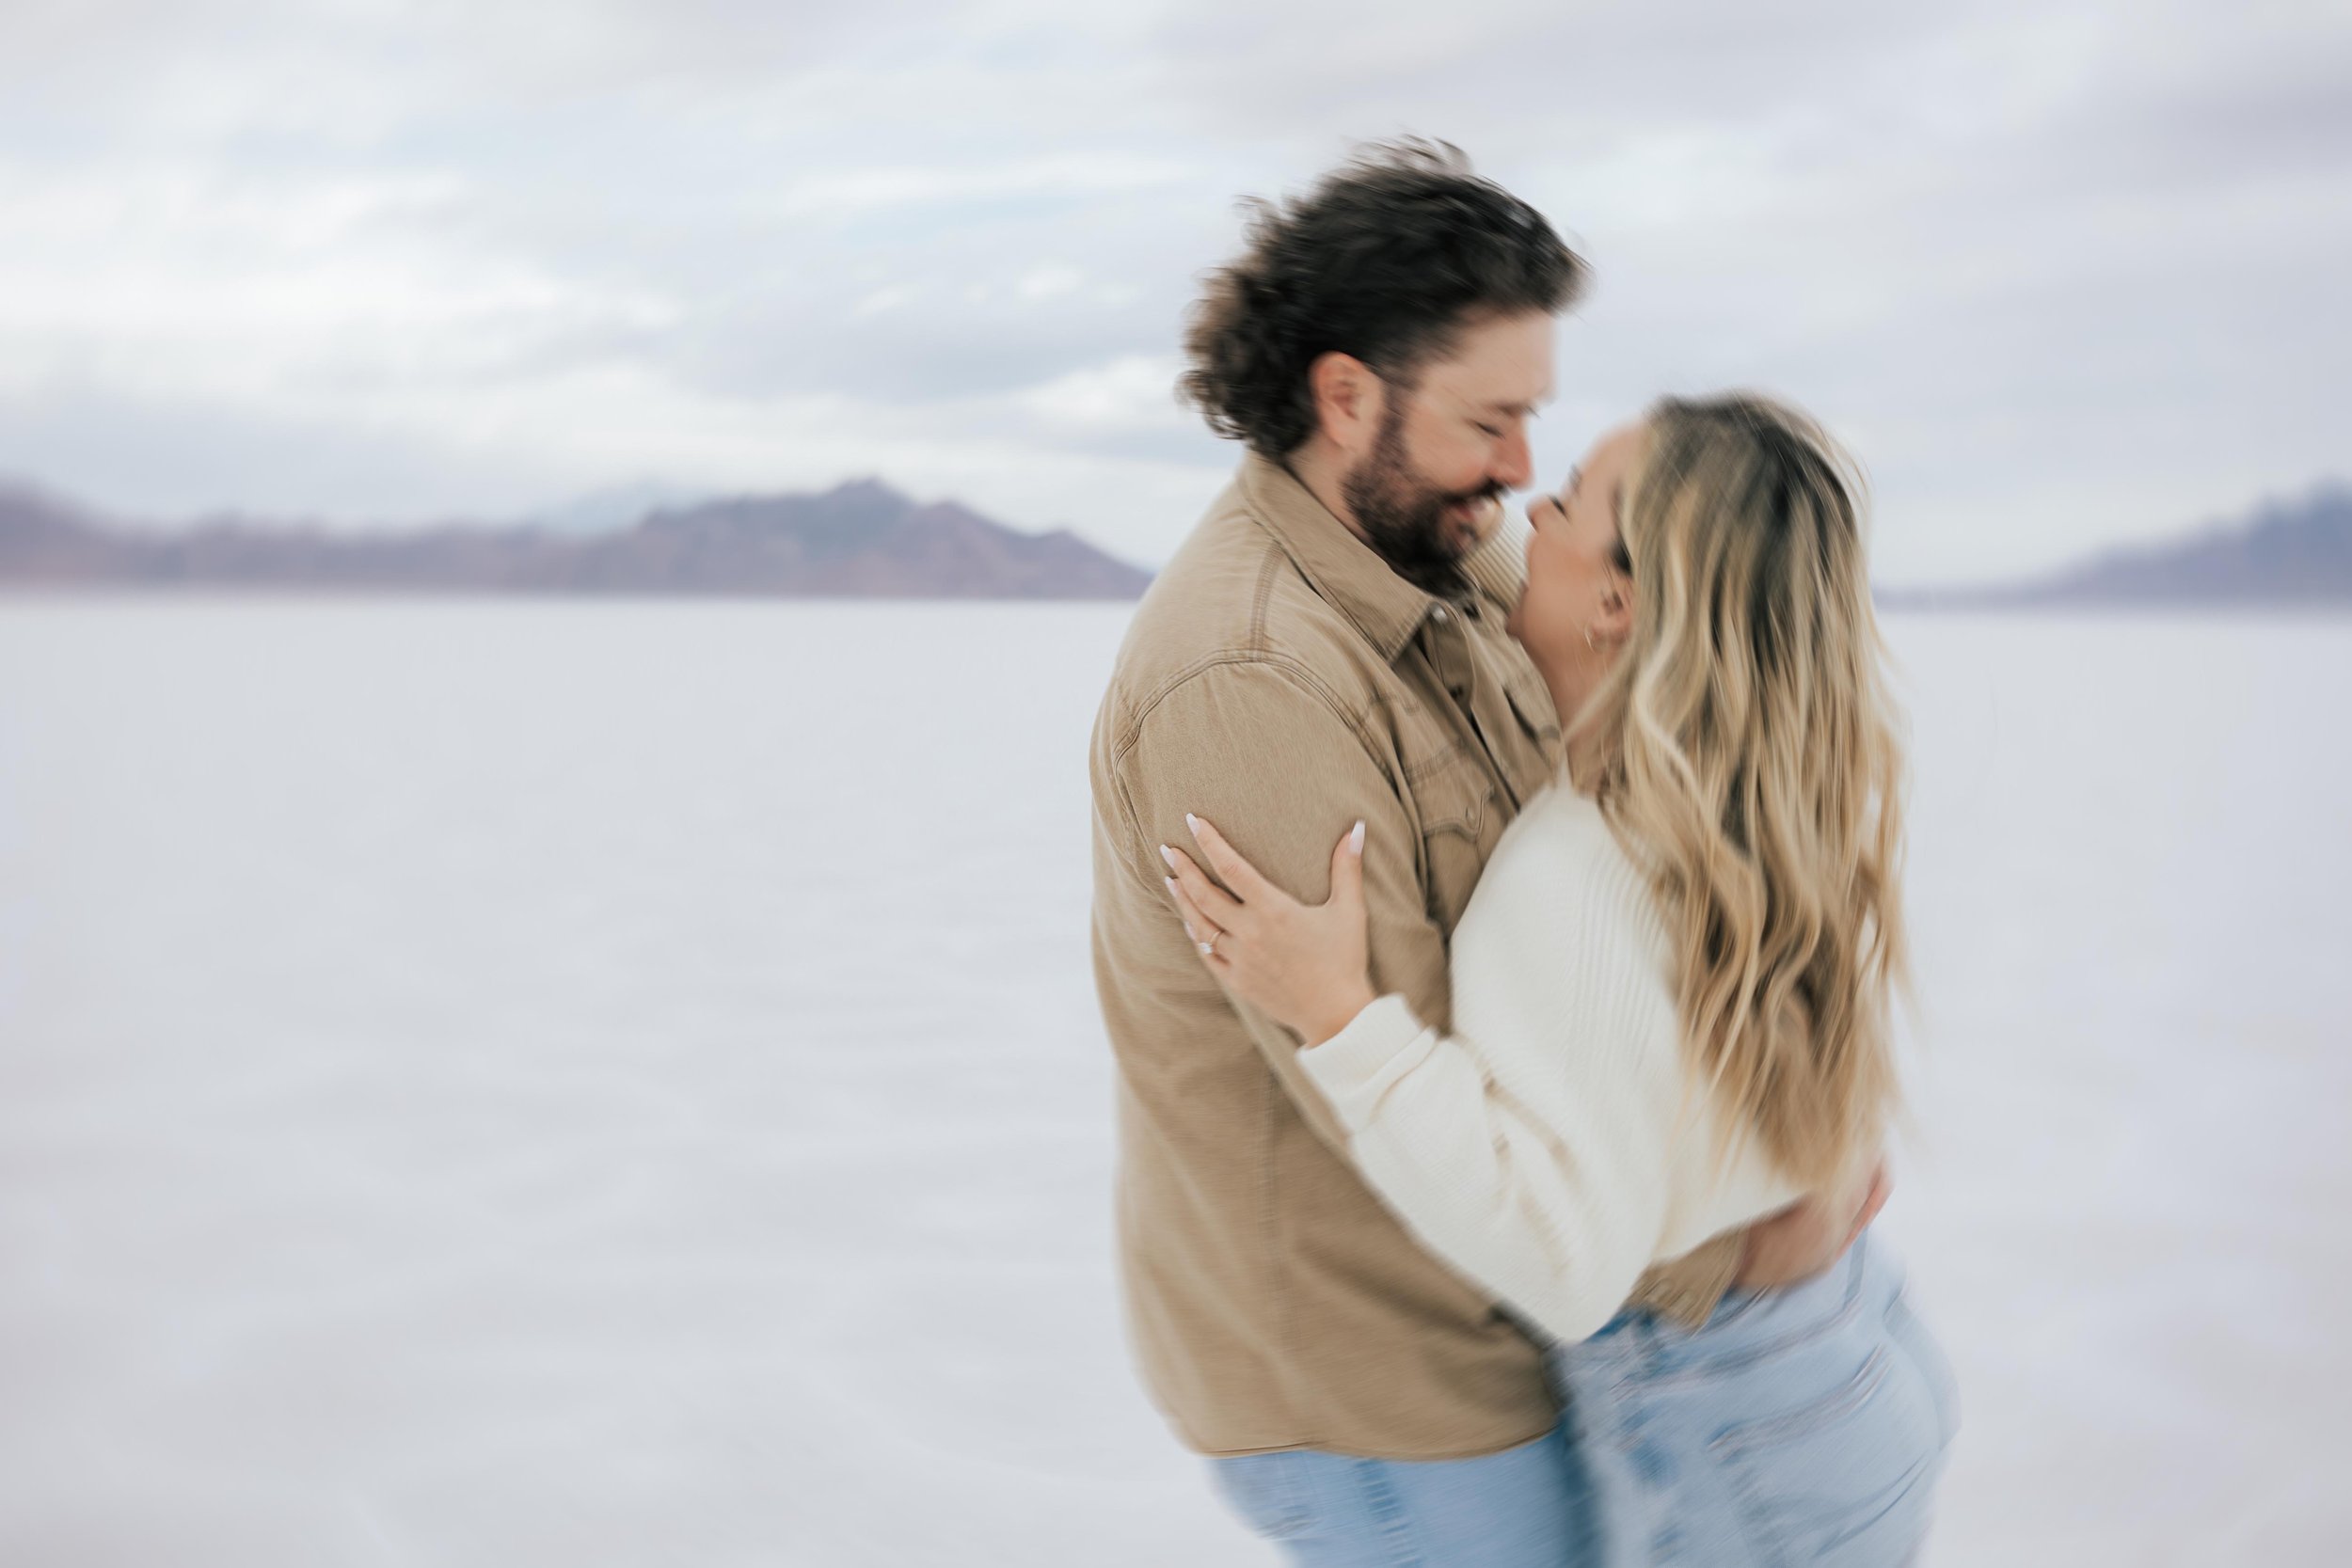  An engaged couple laughs and hugs as they pose for a blurry photo at the Bonneville Salt Flats near Wendover, Nevada and Salt Lake City, Utah. The Salt Flats are white and the sky is overcast. The mountains show behind. Engagement session at the Uta